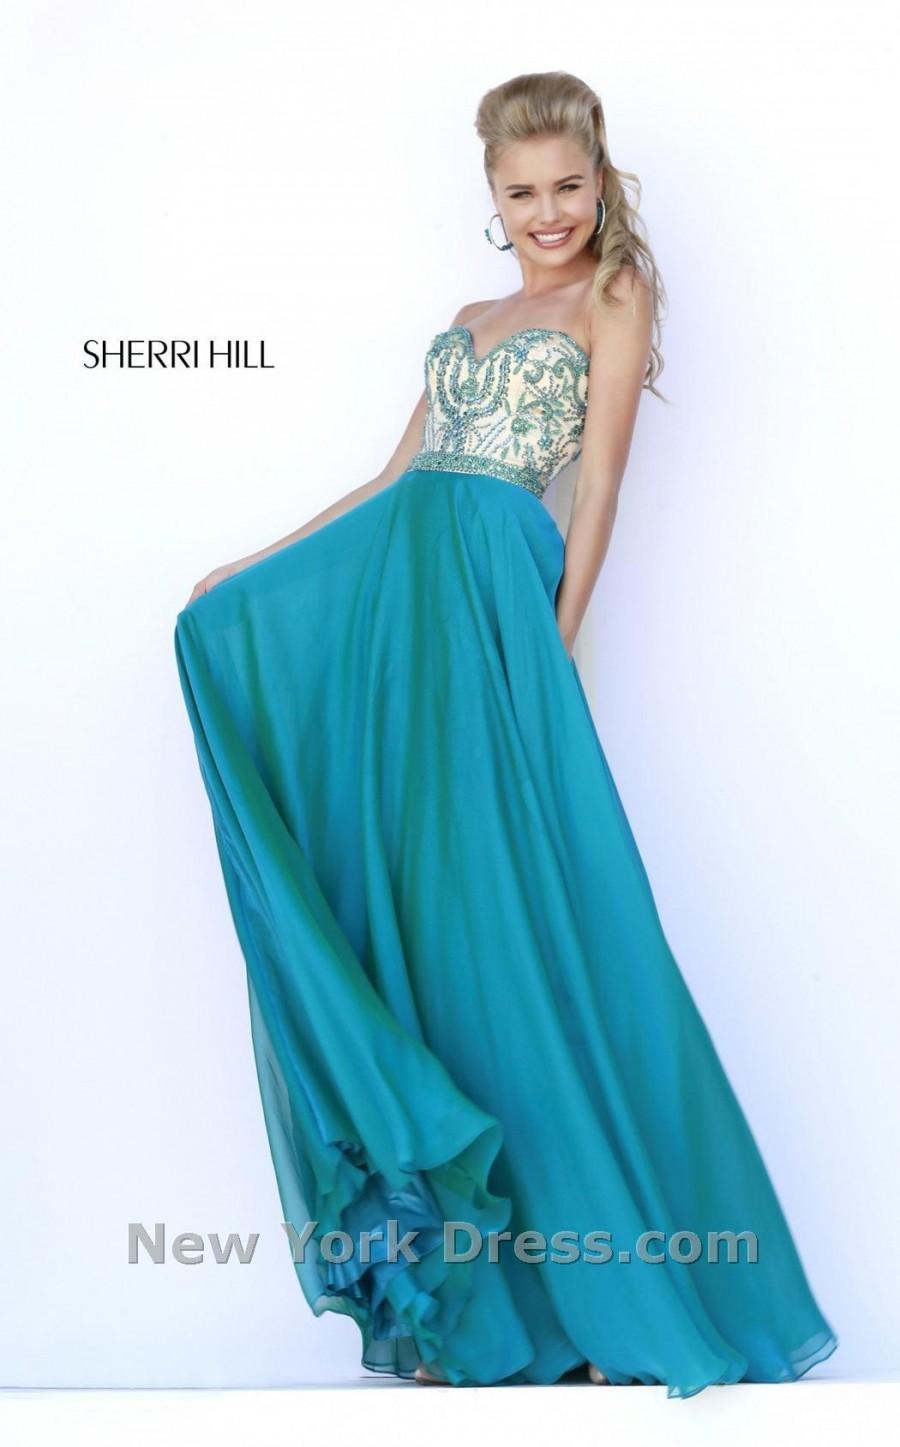 Mariage - New 2015 Turquoise Color Prom Dresses Beads Sweetheart Beautifully Beaded Sash Floor Length Evening Dresses Online with $123.98/Piece on Hjklp88's Store 